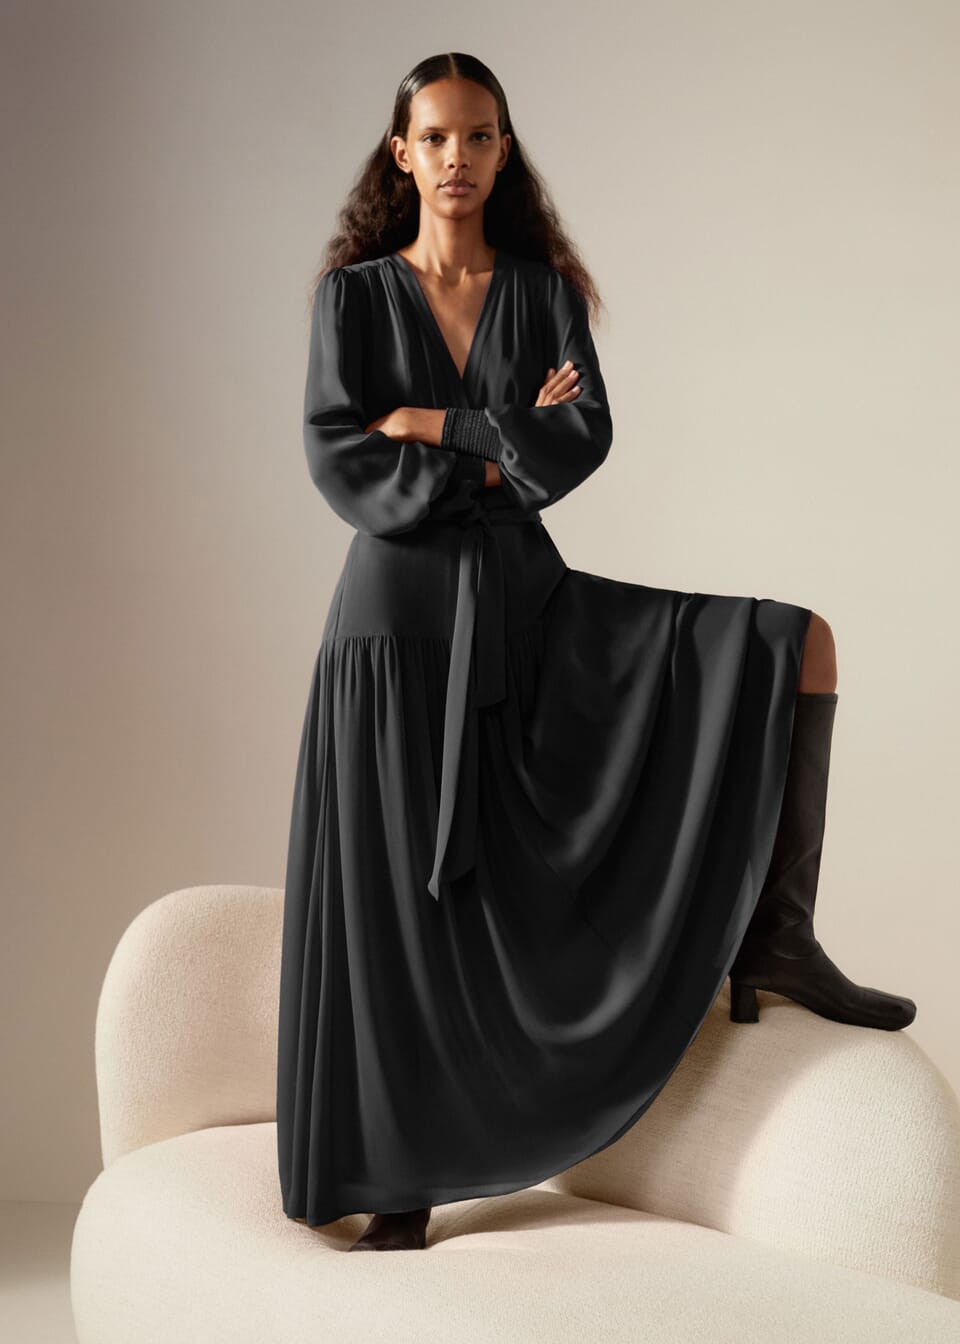 A forever investment, this V-neck maxi dress is crafted from elegant pure silk in a versatile neutral hue and features our signature intelligent design details for styling versatility and a flattering fit.